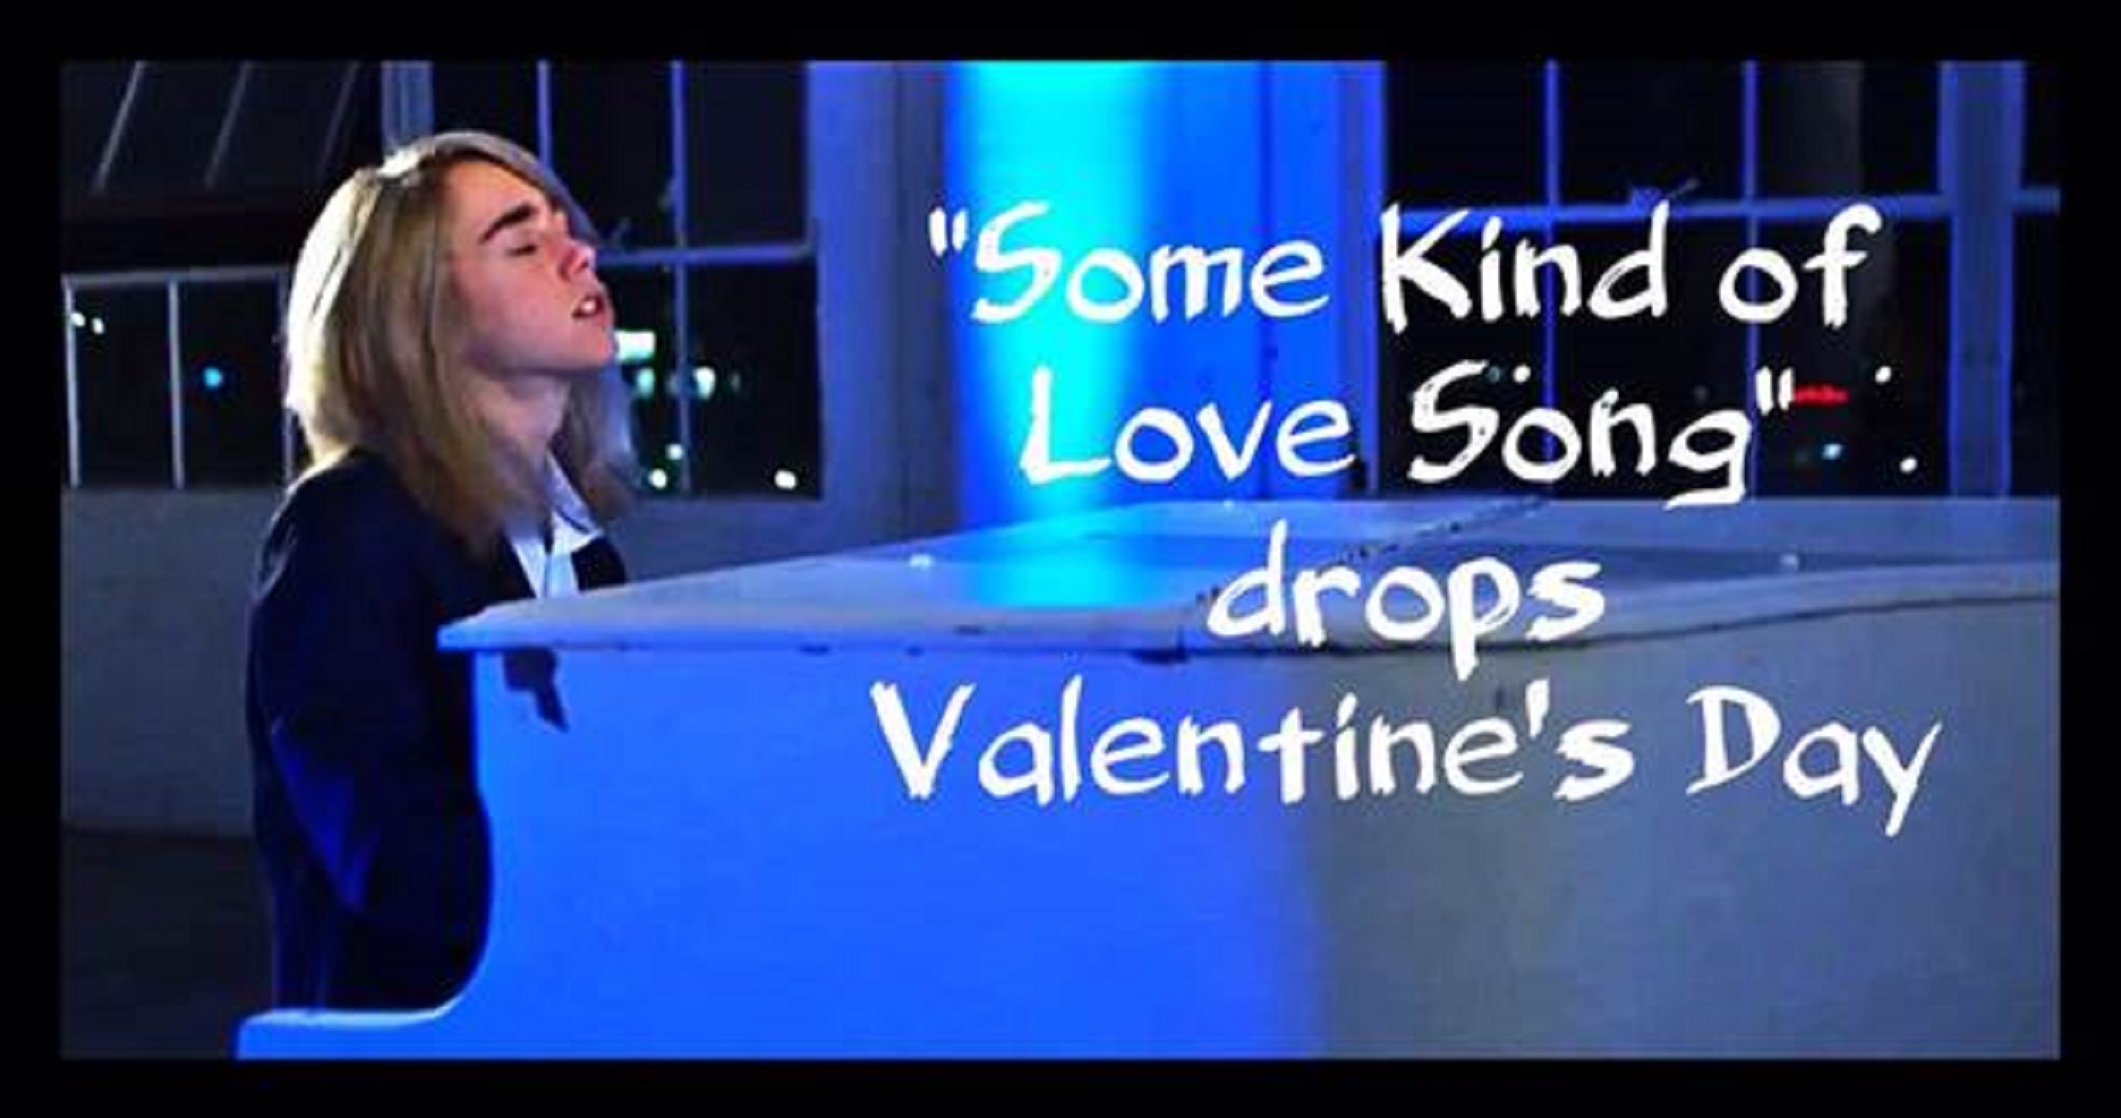 Some Kind of Love Song Video by Griffin Tucker to be Released on Valentine’s Day